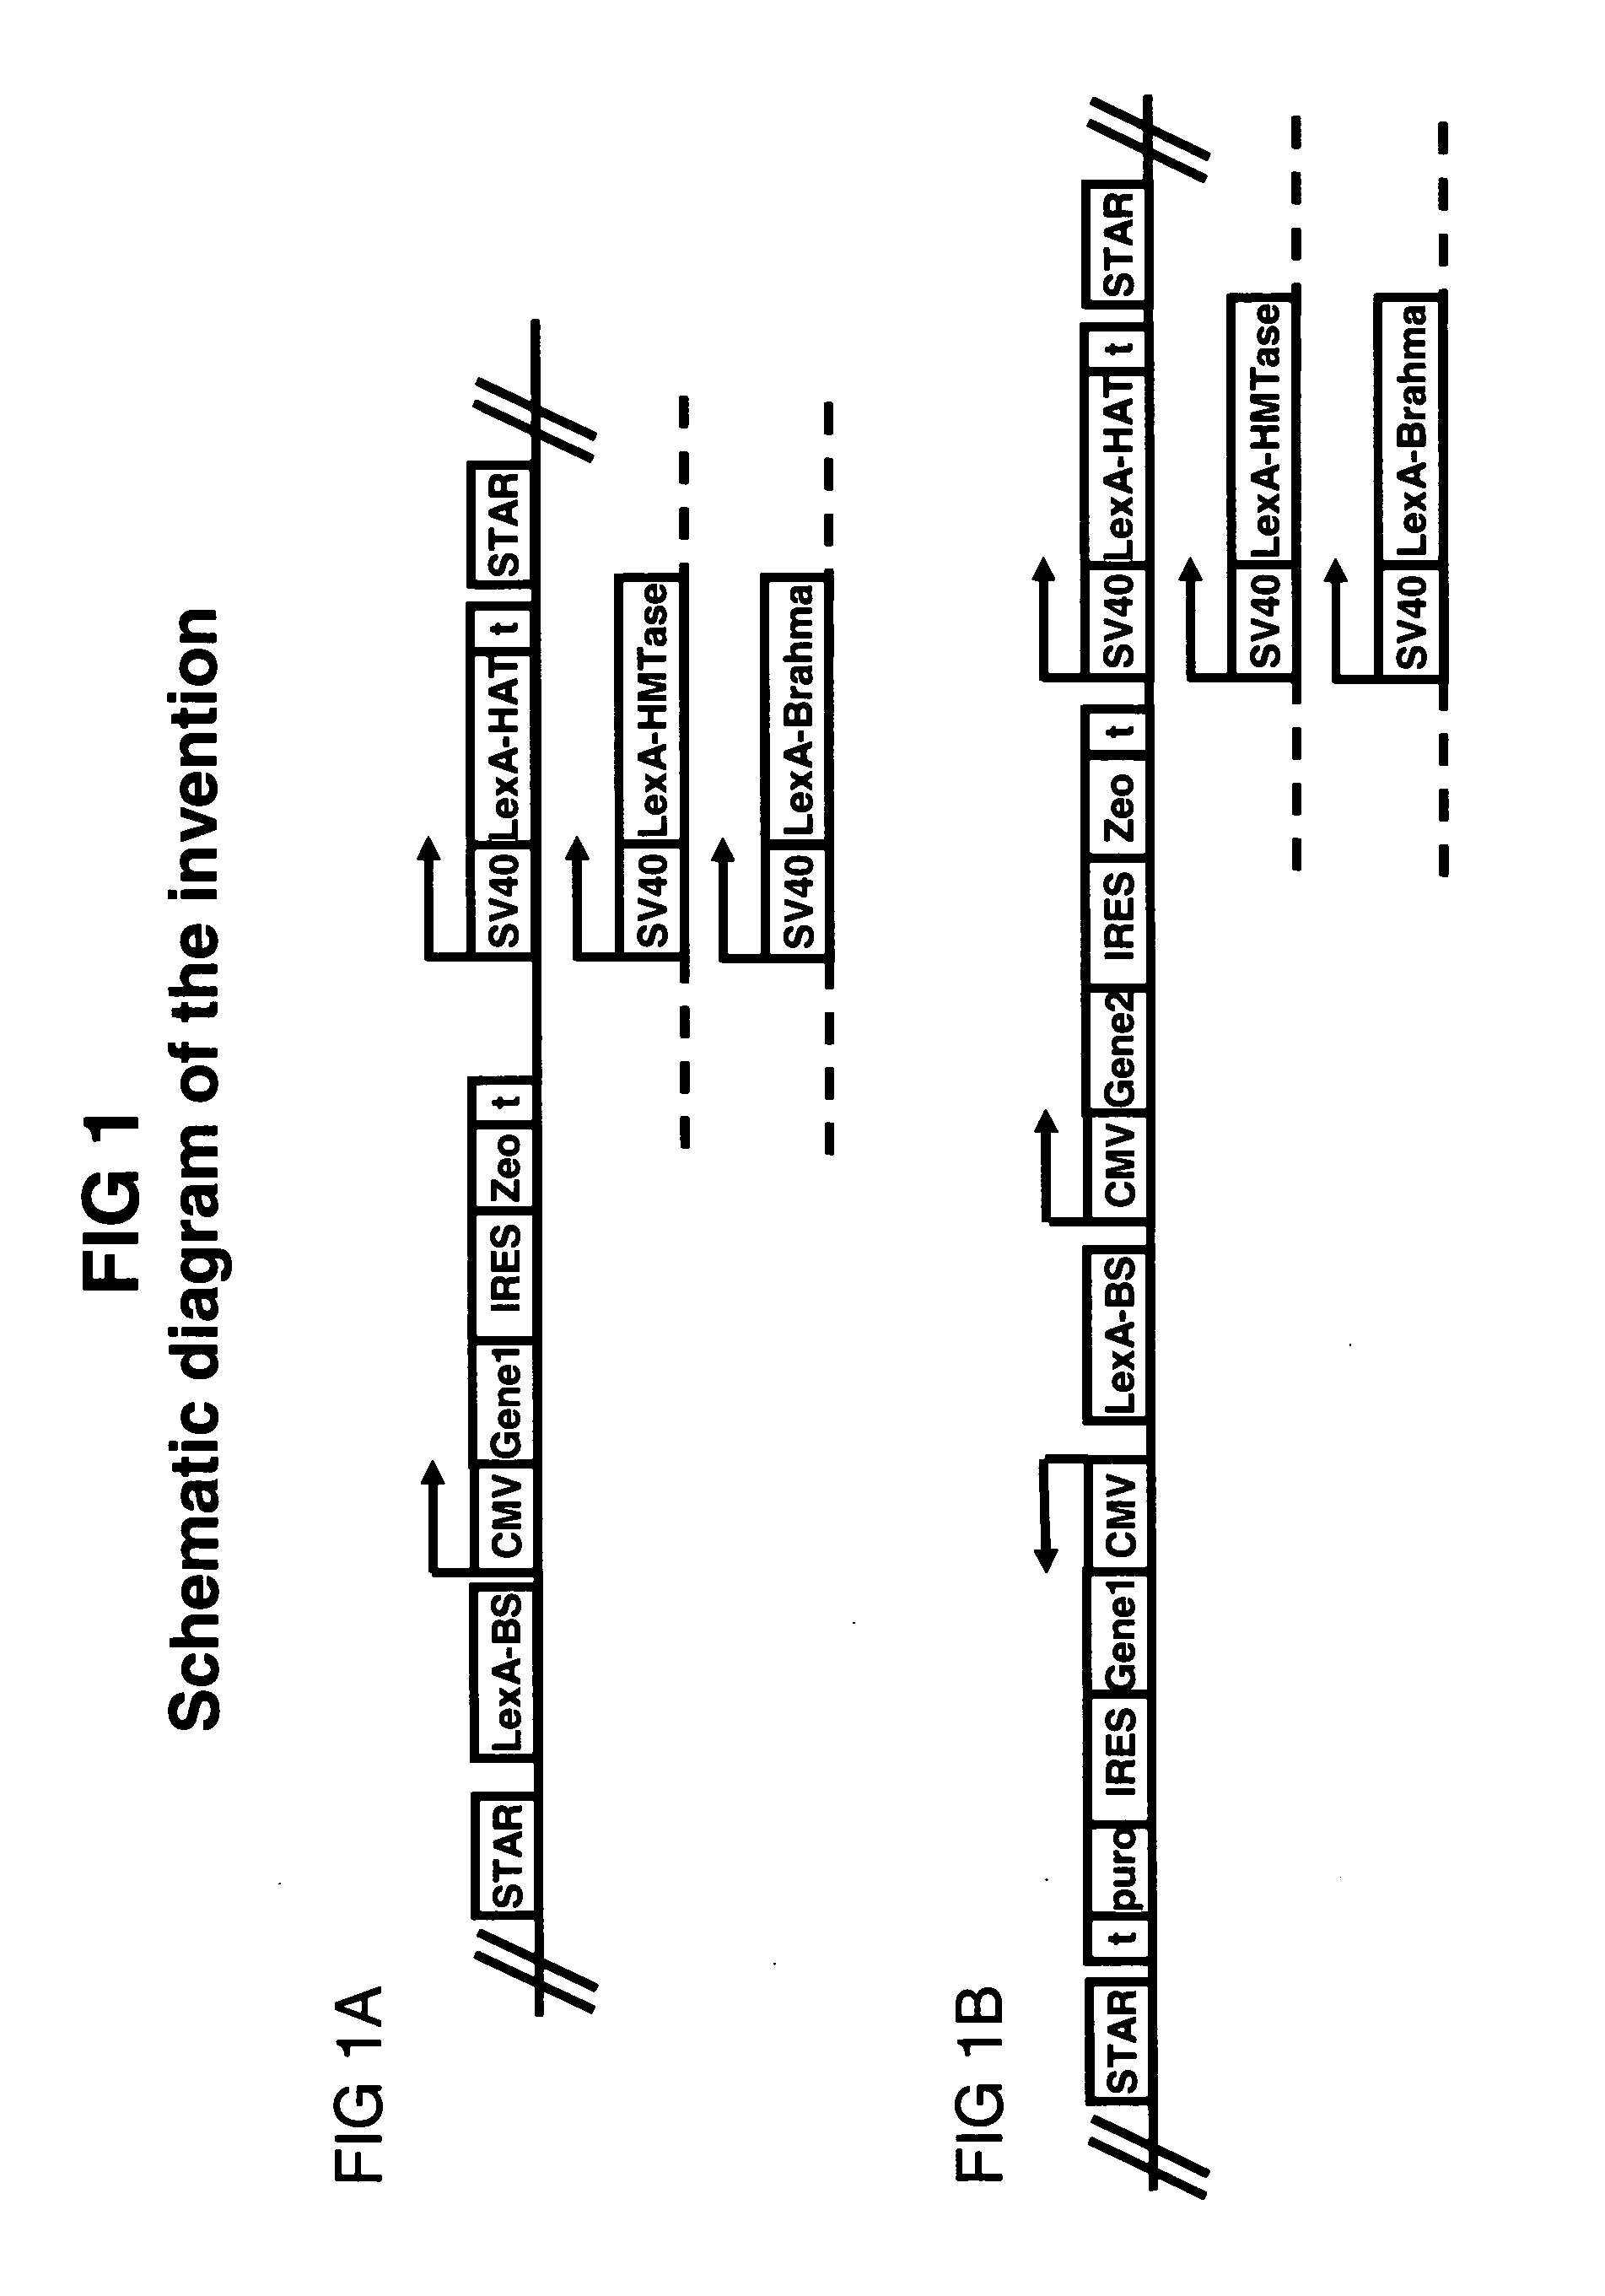 Means and methods for producing a protein through chromatin openers that are capable of rendering chromatin more accessible to transcription factors